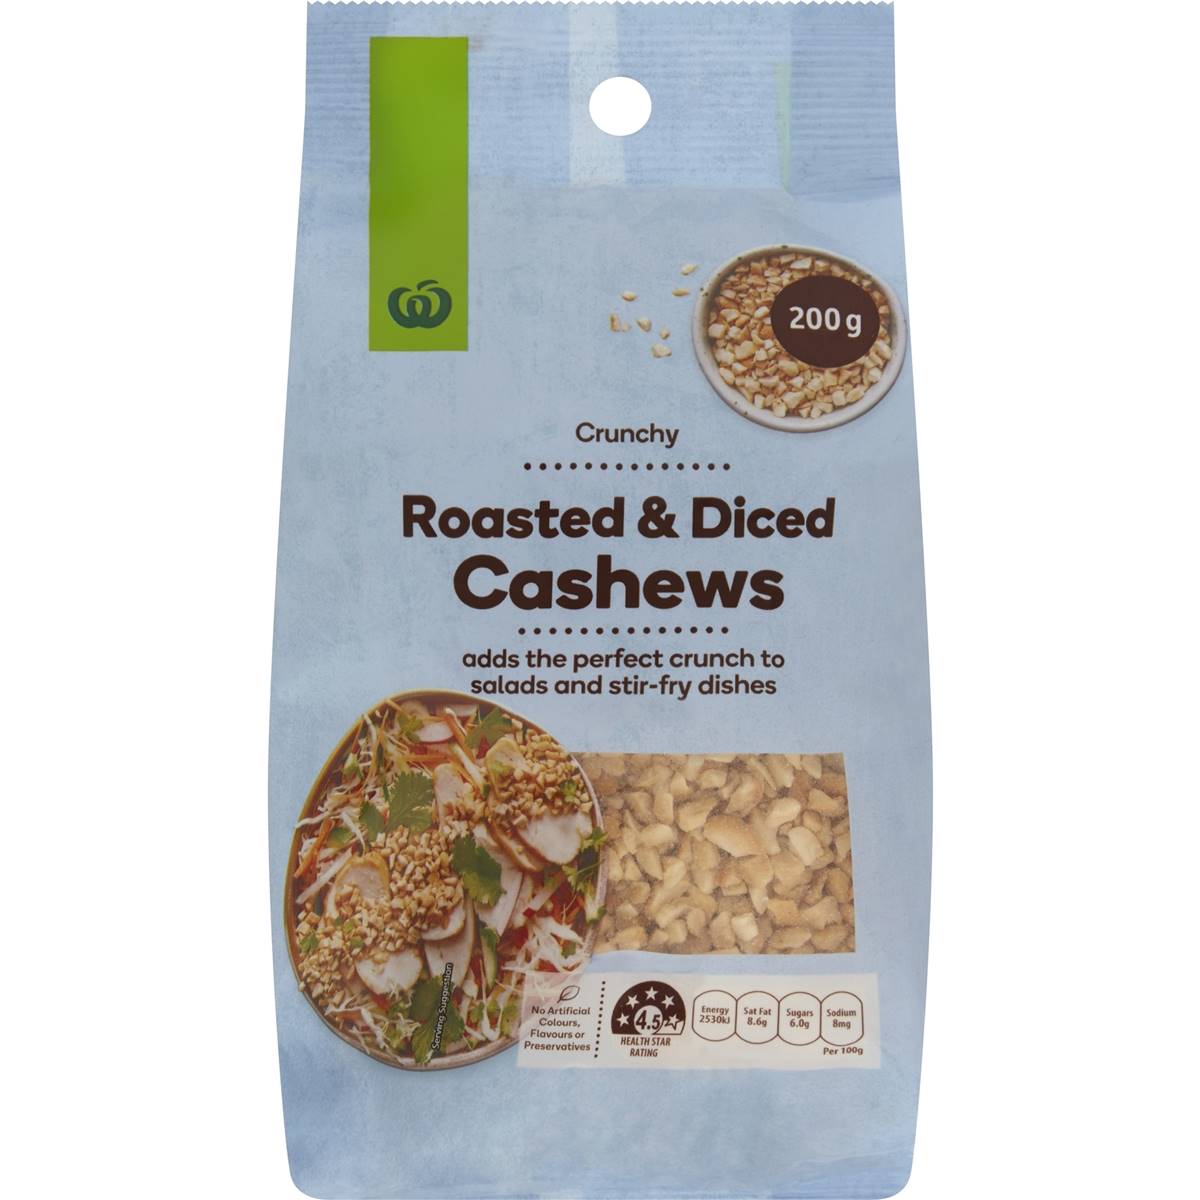 Calories in Woolworths Roasted & Diced Cashews